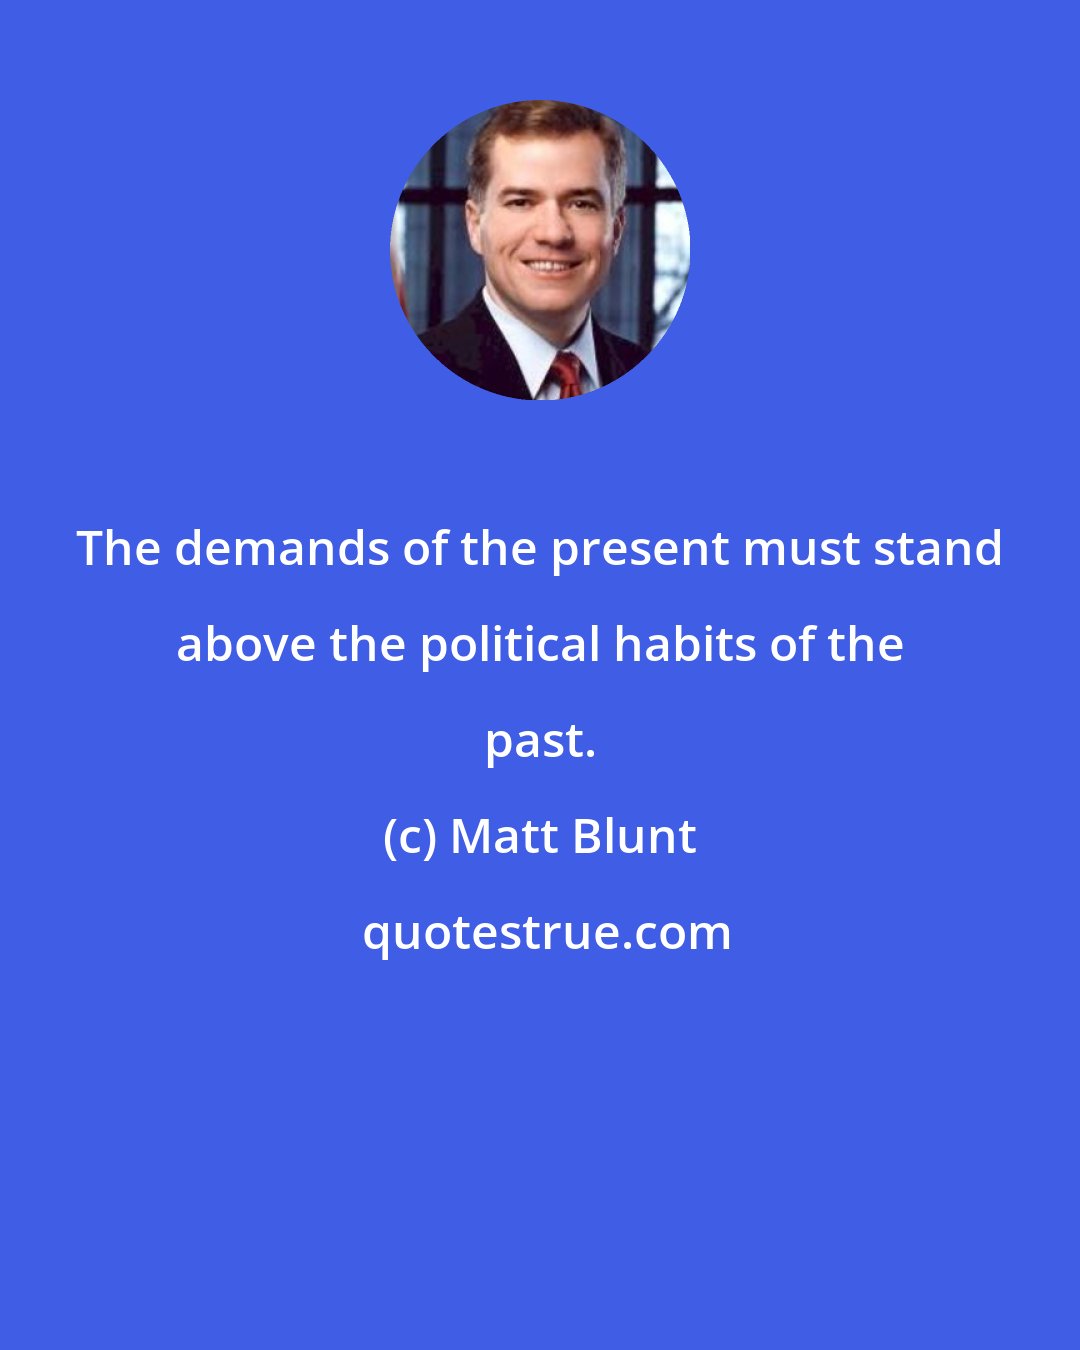 Matt Blunt: The demands of the present must stand above the political habits of the past.